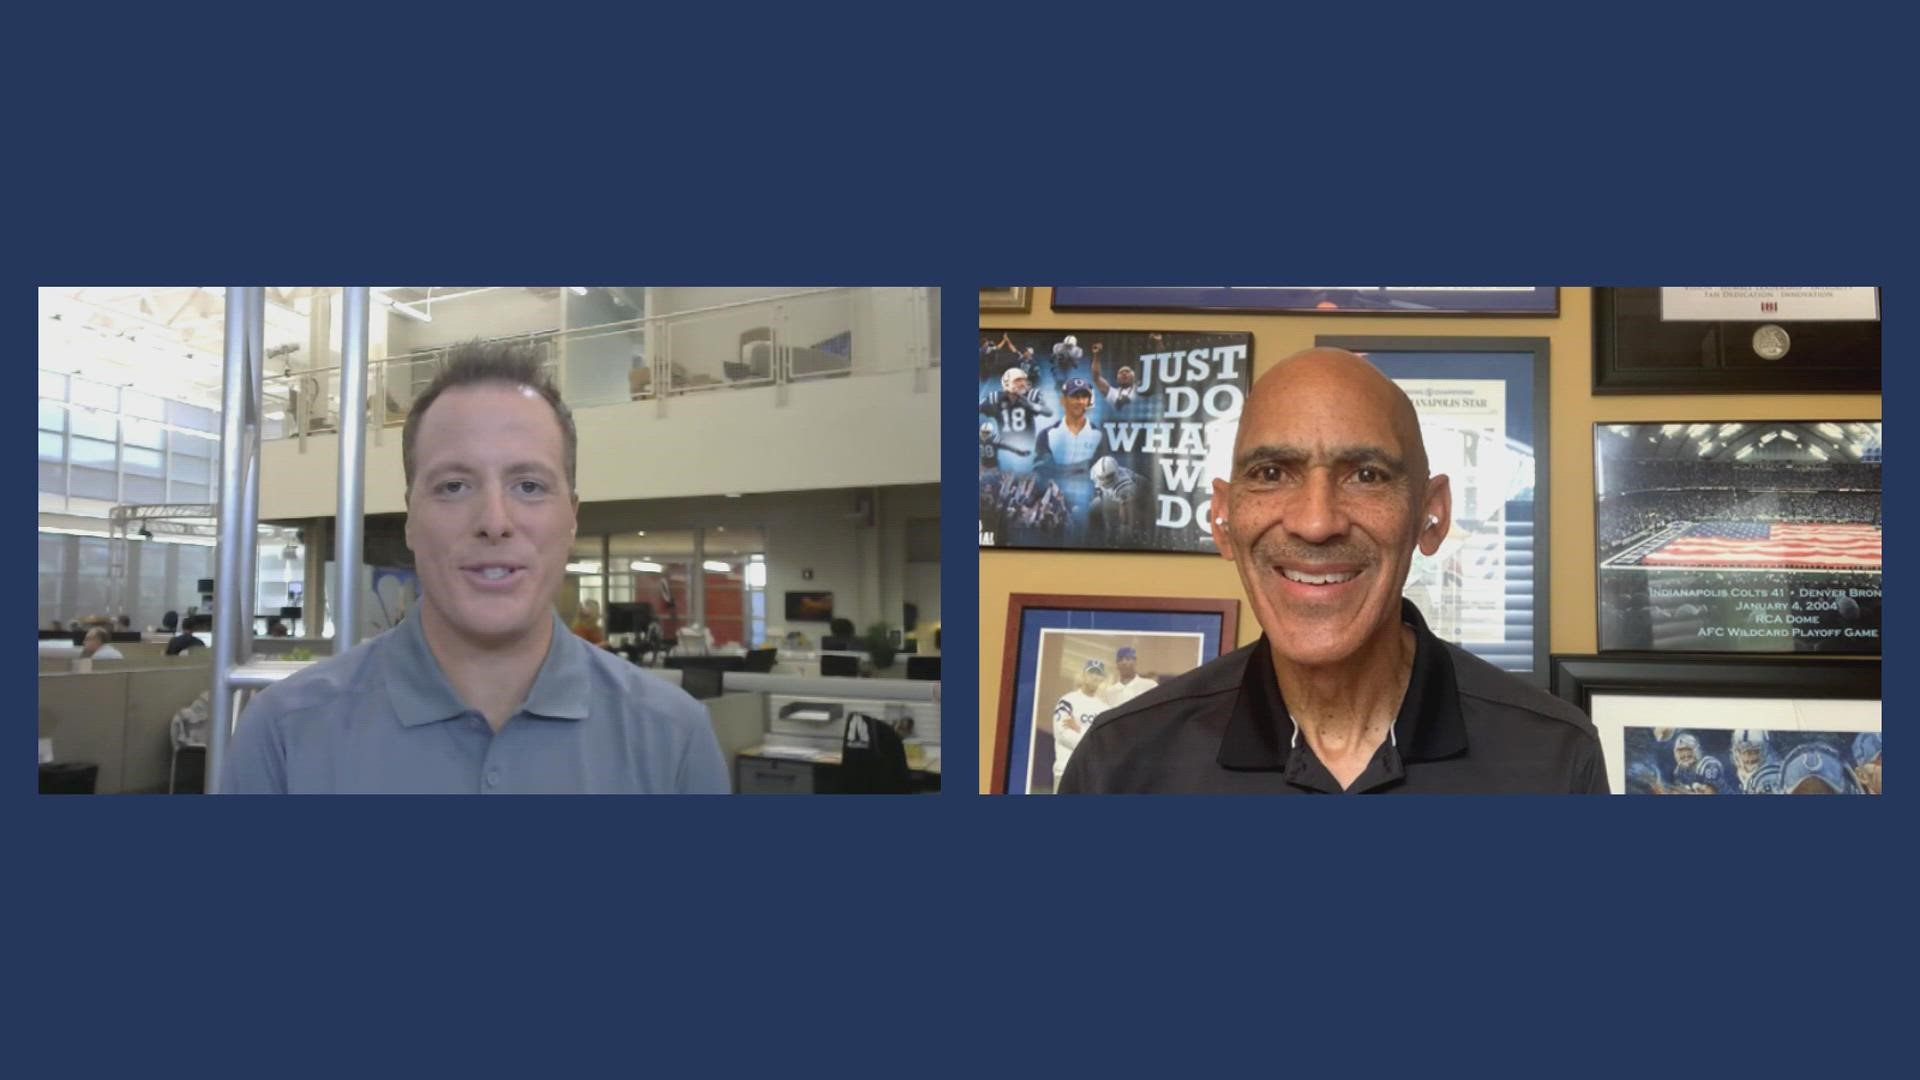 Nick and the coach talk Browns, Deshaun Watson, and Jacoby Brissett. They also preview Thursday's NFL opener on NBC between the Rams and Bills.